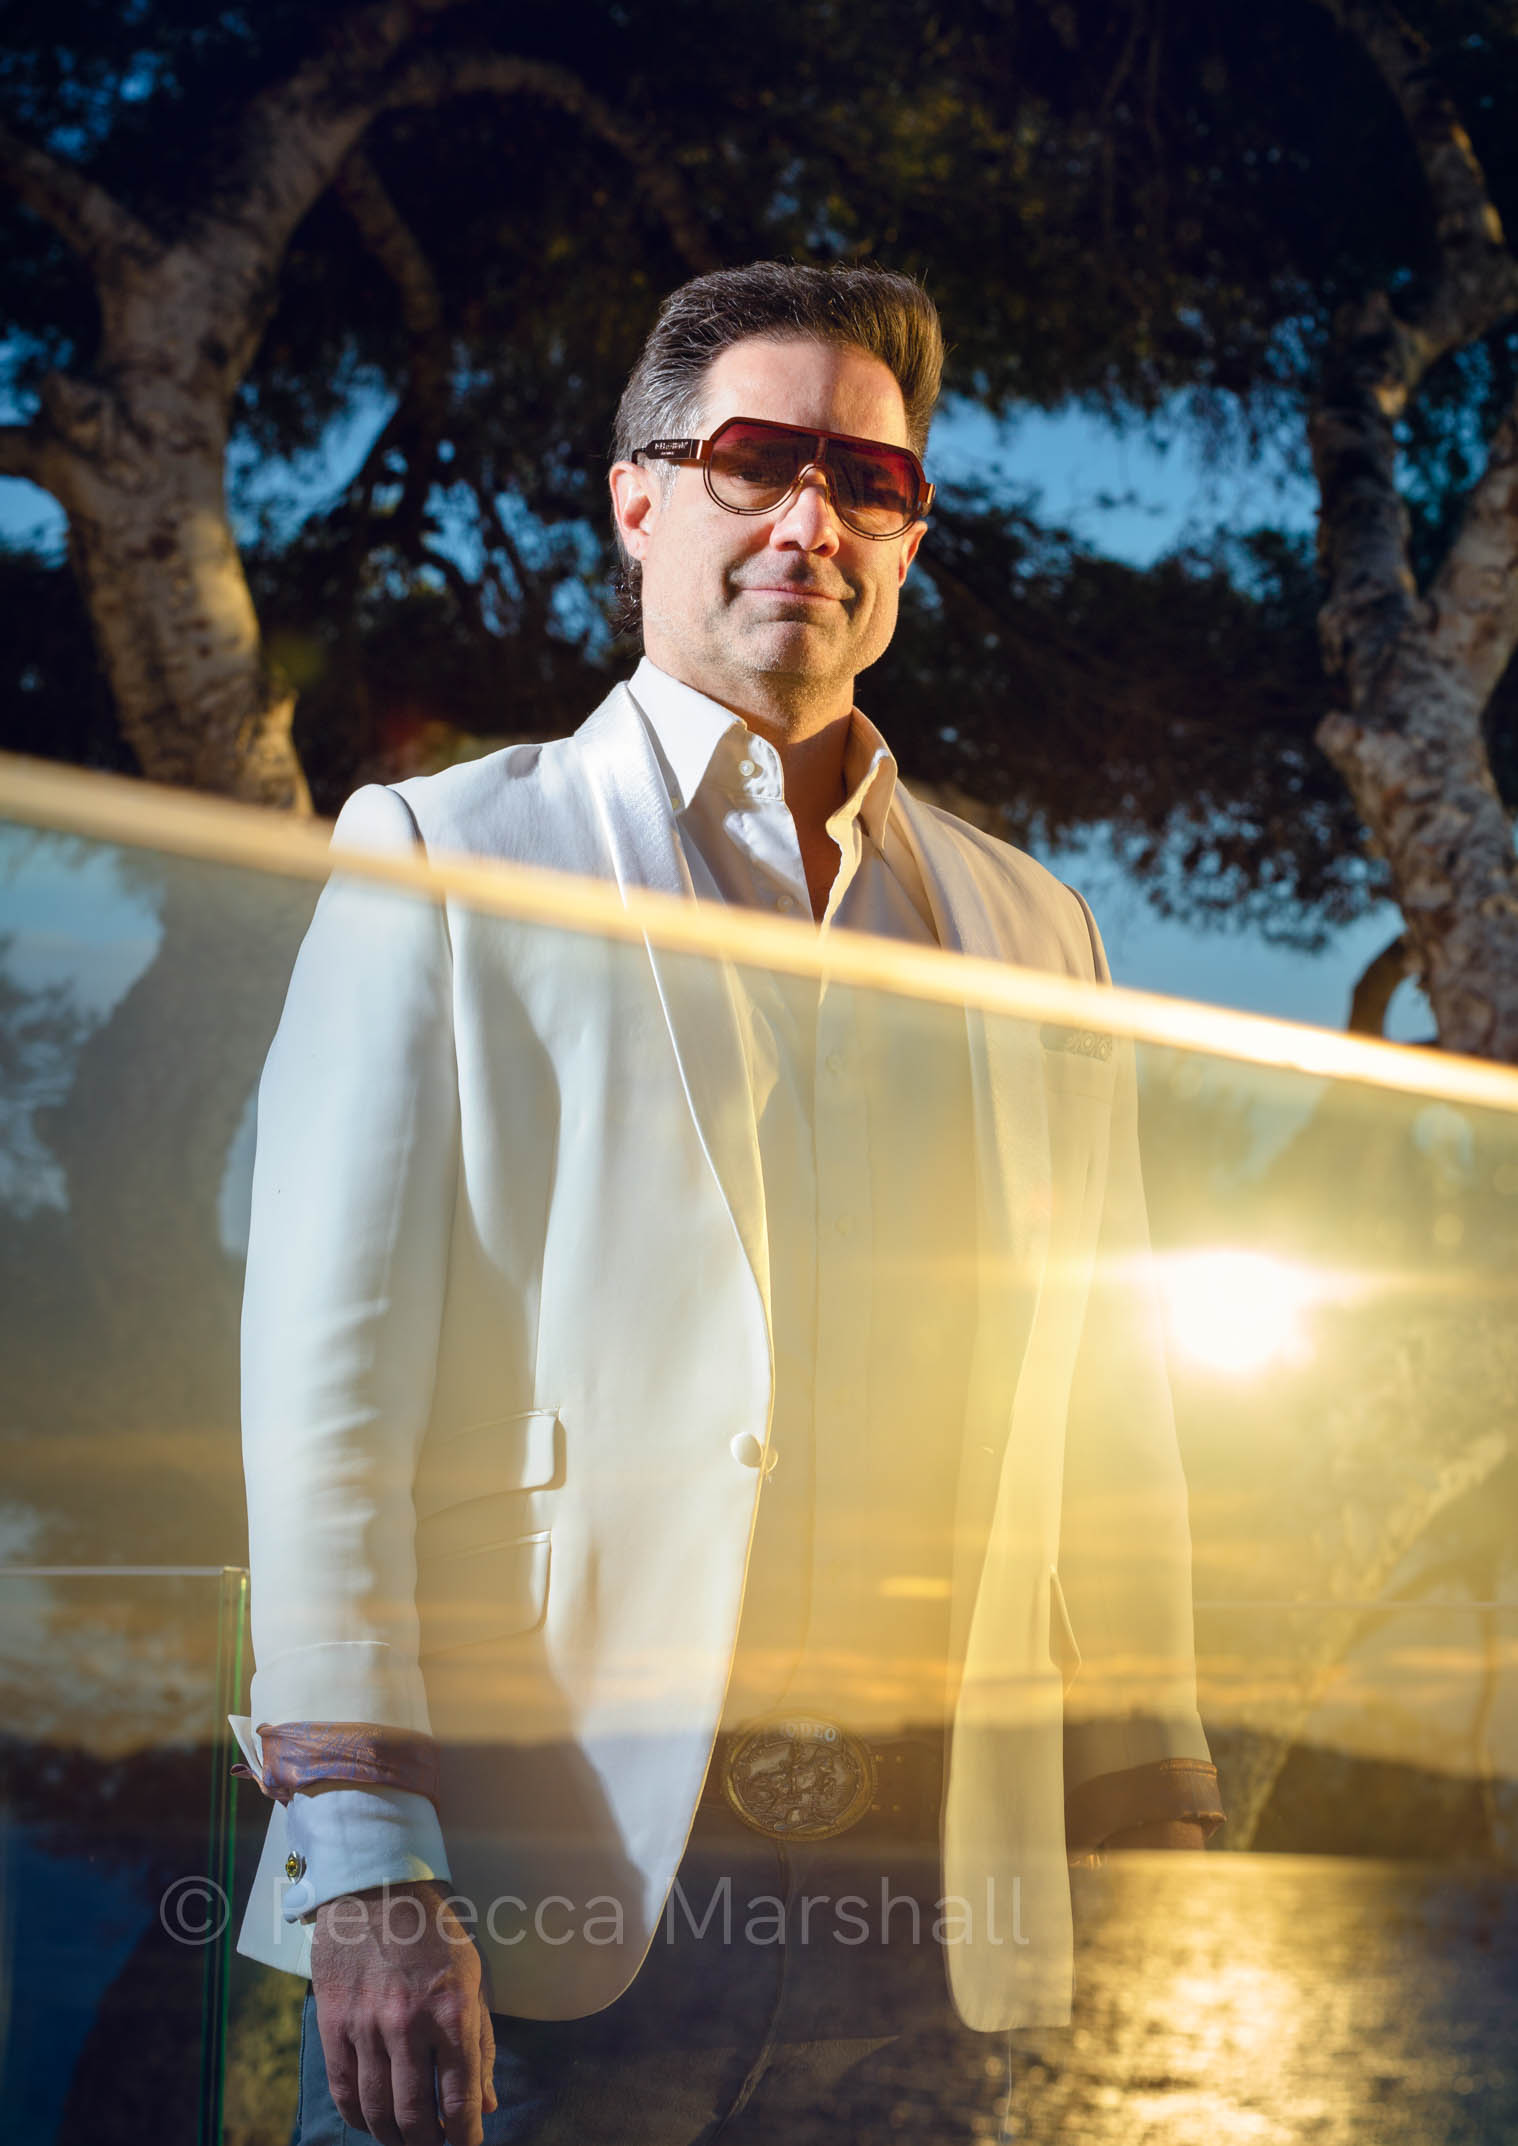 Portrait of a man in sunglasses standing behind a glass wall reflecting the sunset